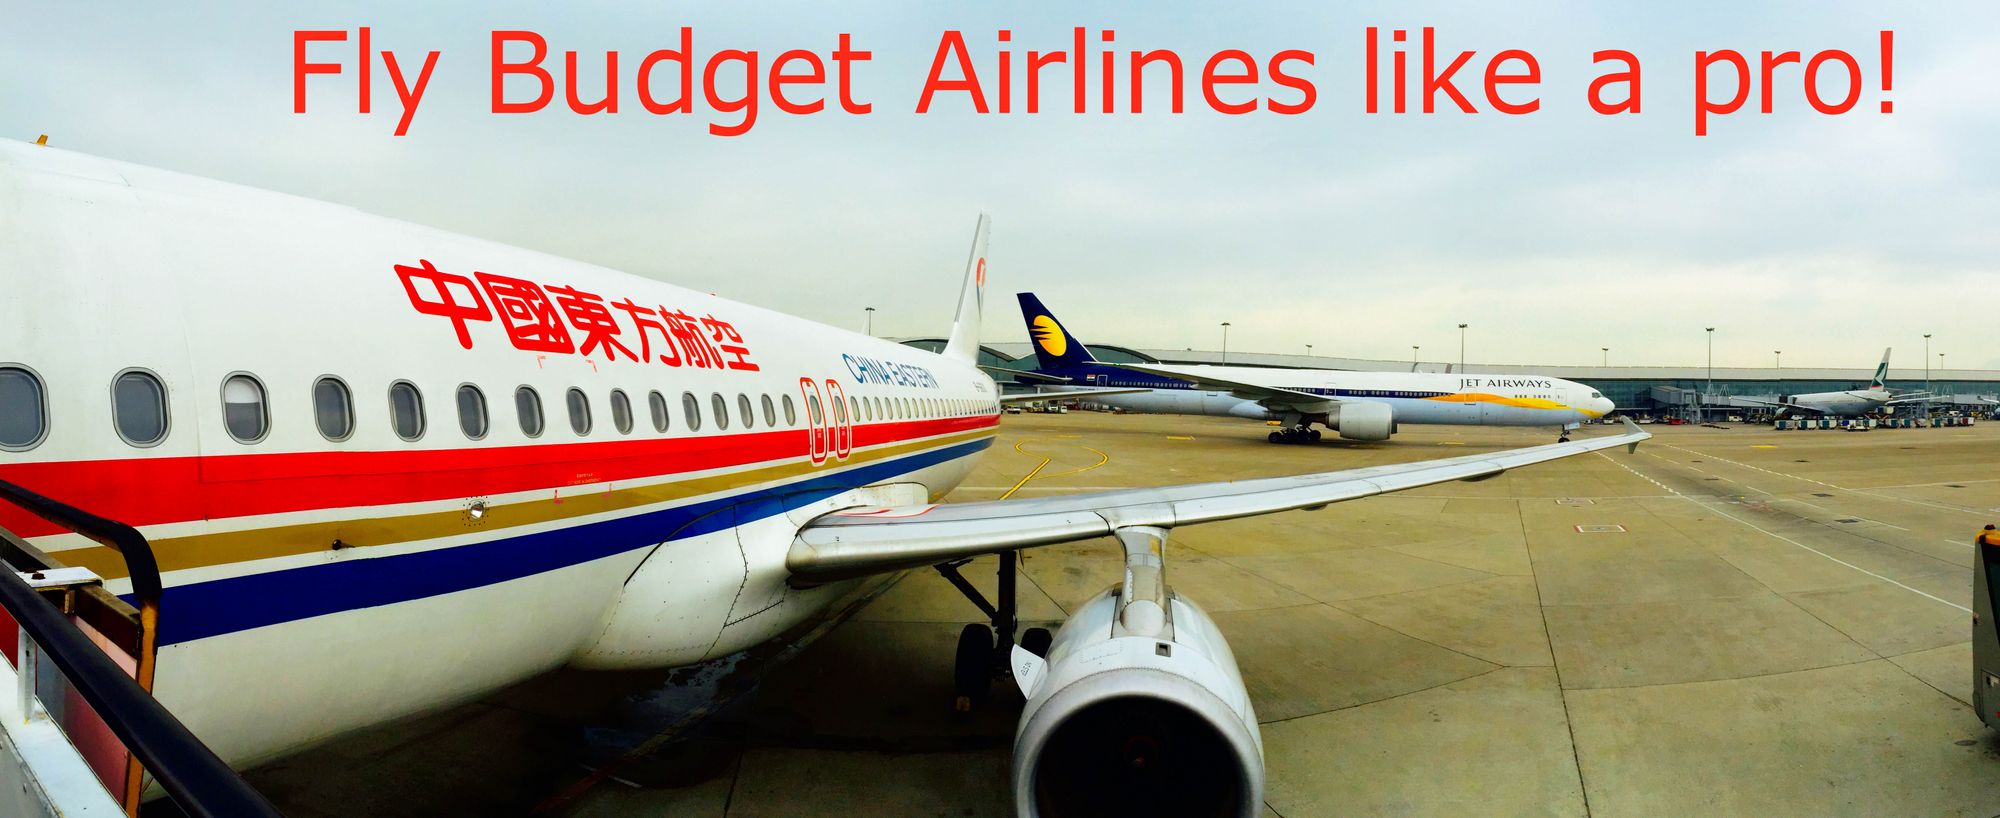 3 simple tips to fly budget airlines like a pro